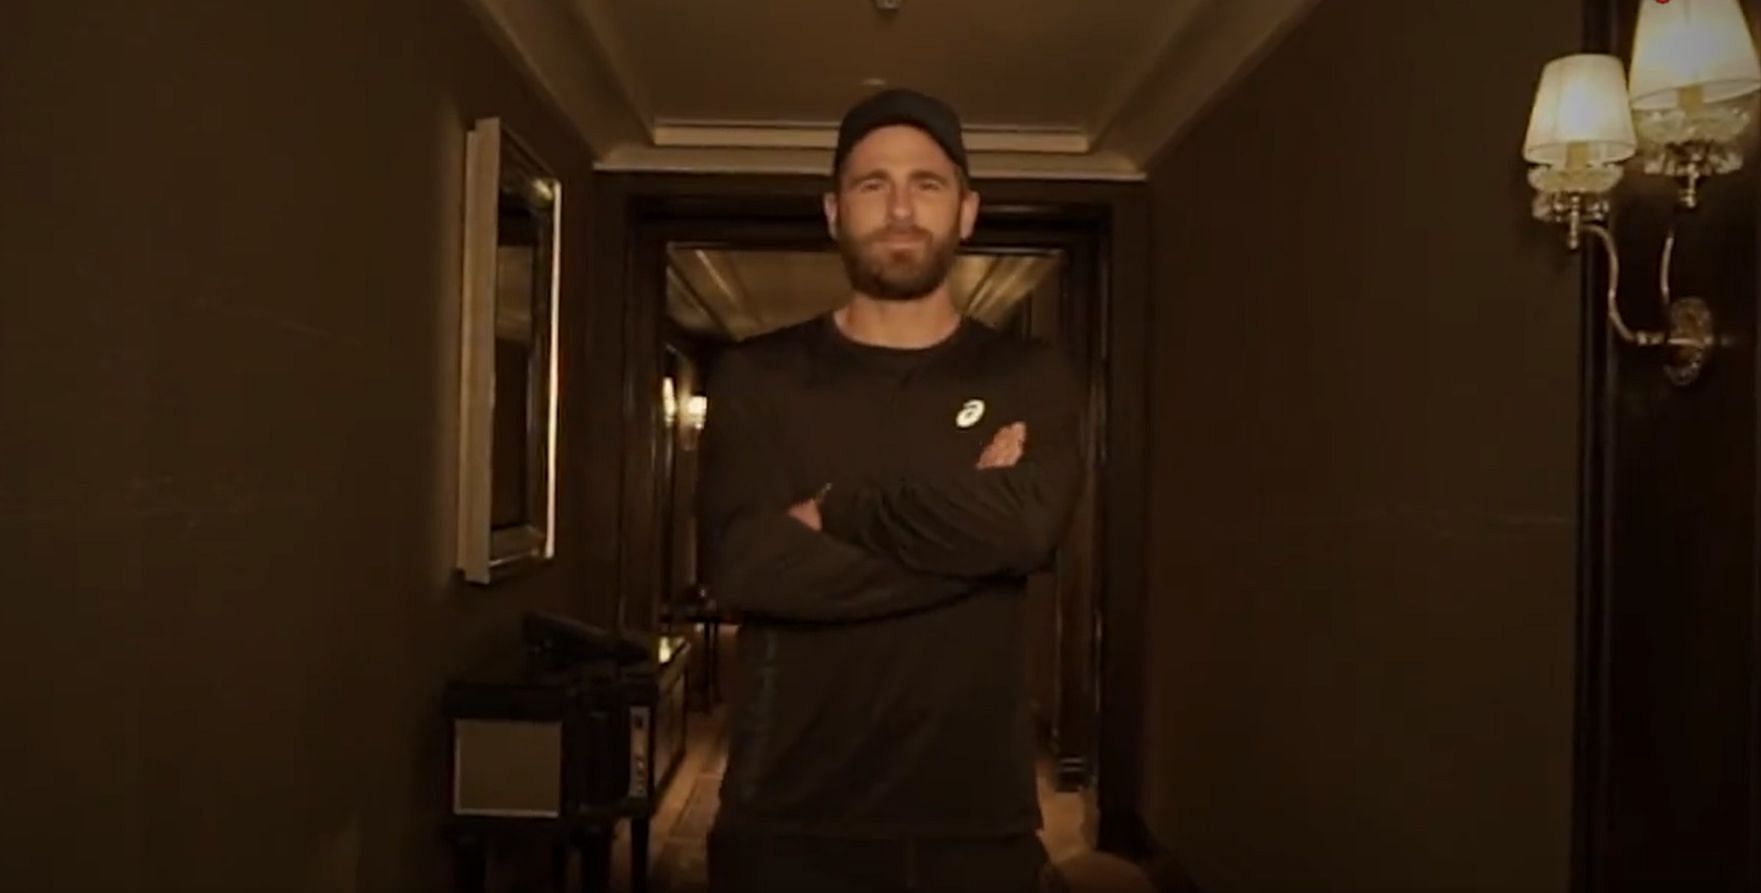 Kane Williamson has arrived to join SRH for IPL 2022